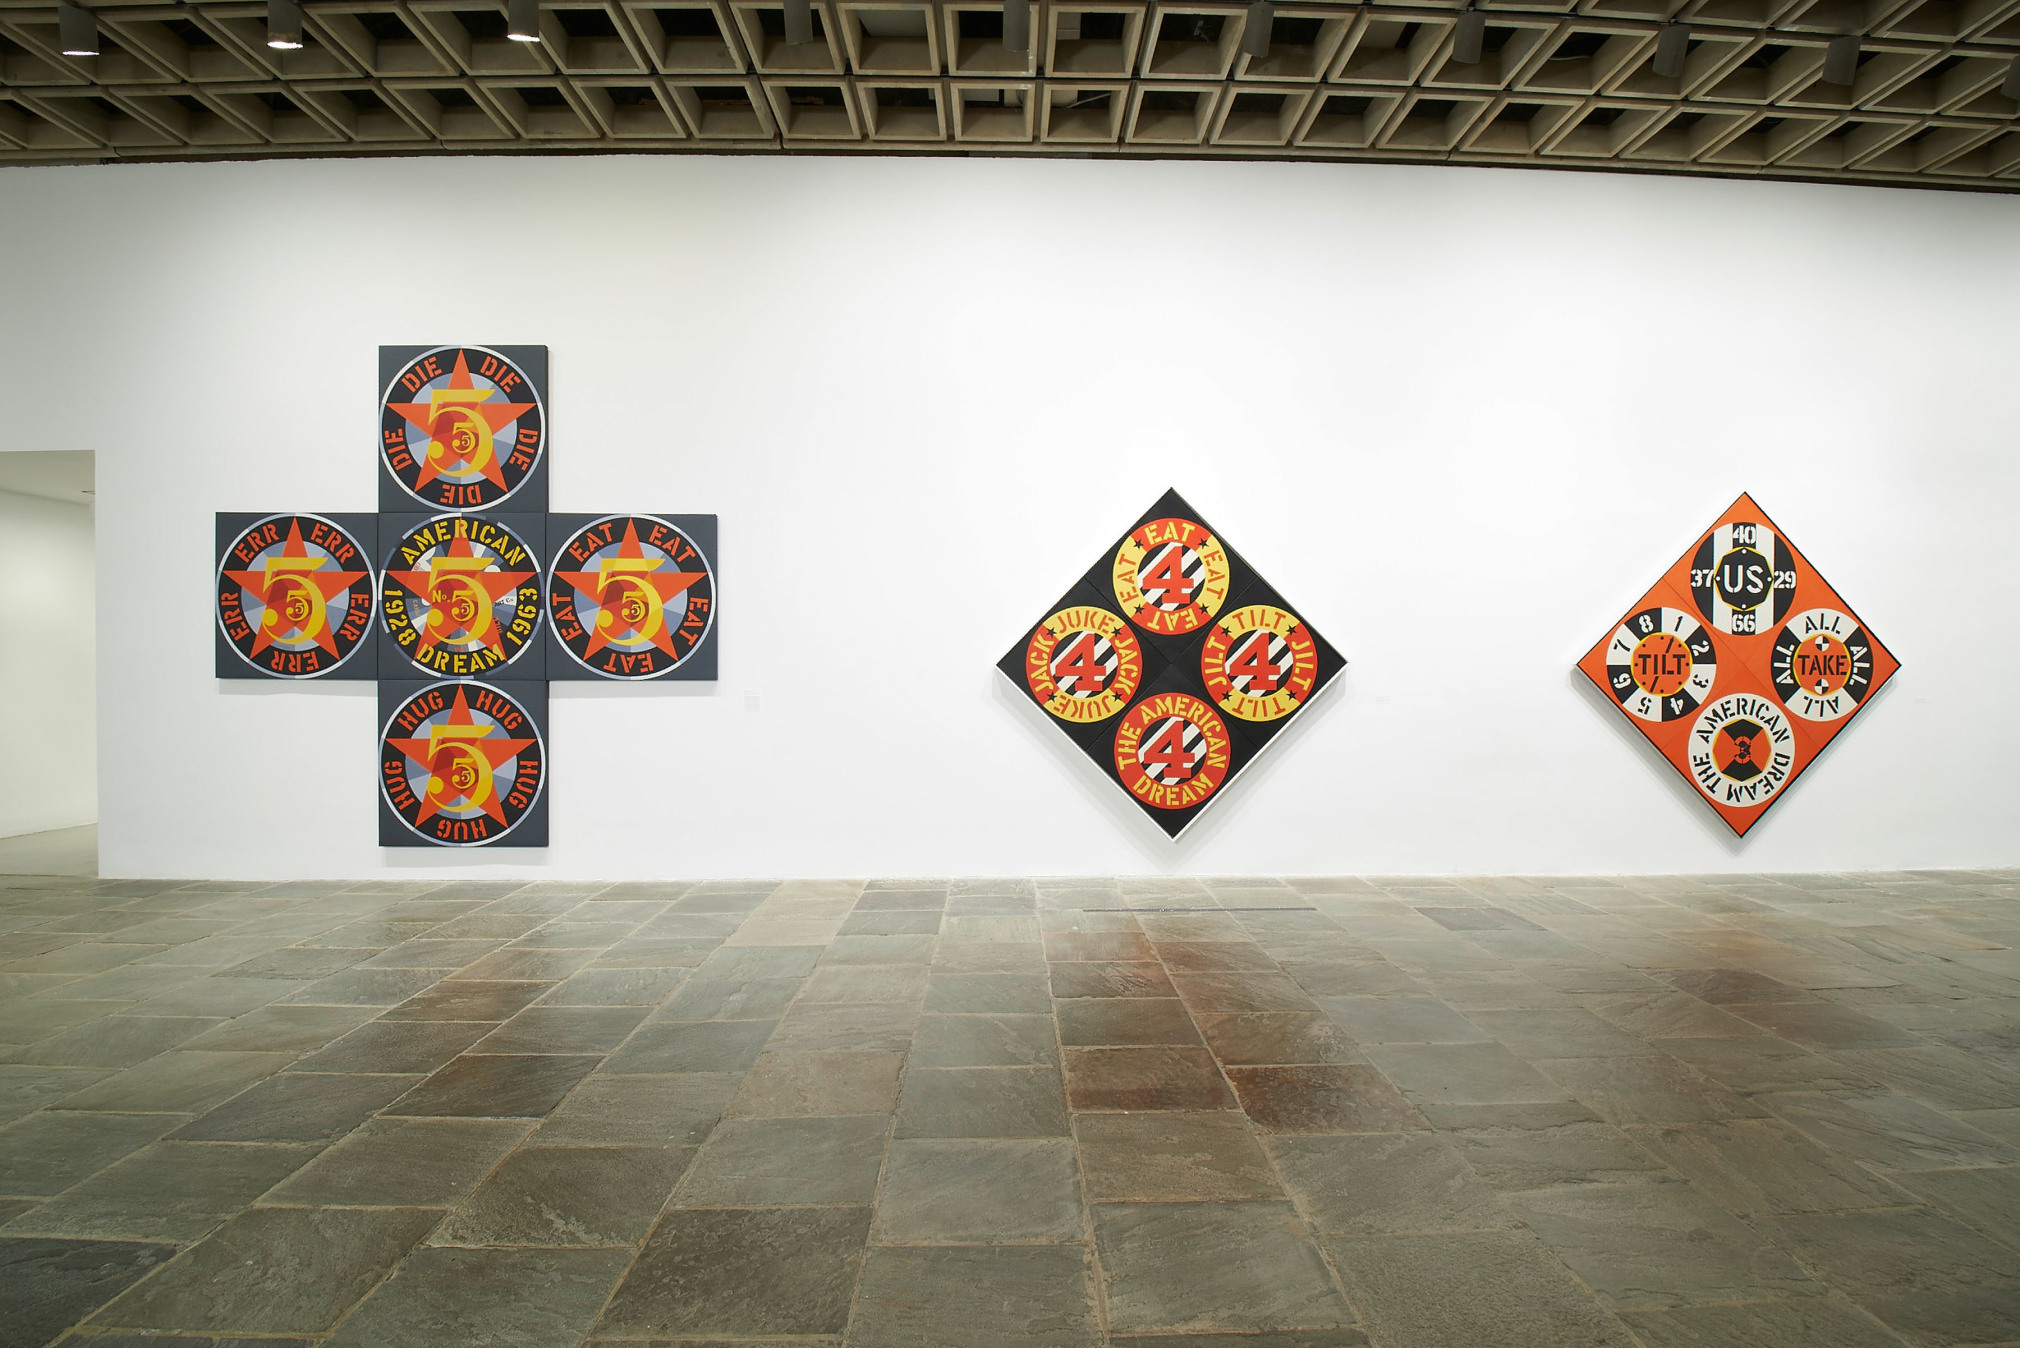 Installation view of Robert Indiana: Beyond LOVE, Whitney Museum of American Art, New York, September 26, 2013&ndash;January 5, 2014. Left to right, The Demuth American Dream No. 5 (1963), The Beware-Danger American Dream #4 (1963), and The Red Diamond American Dream #3 (1962), &nbsp;